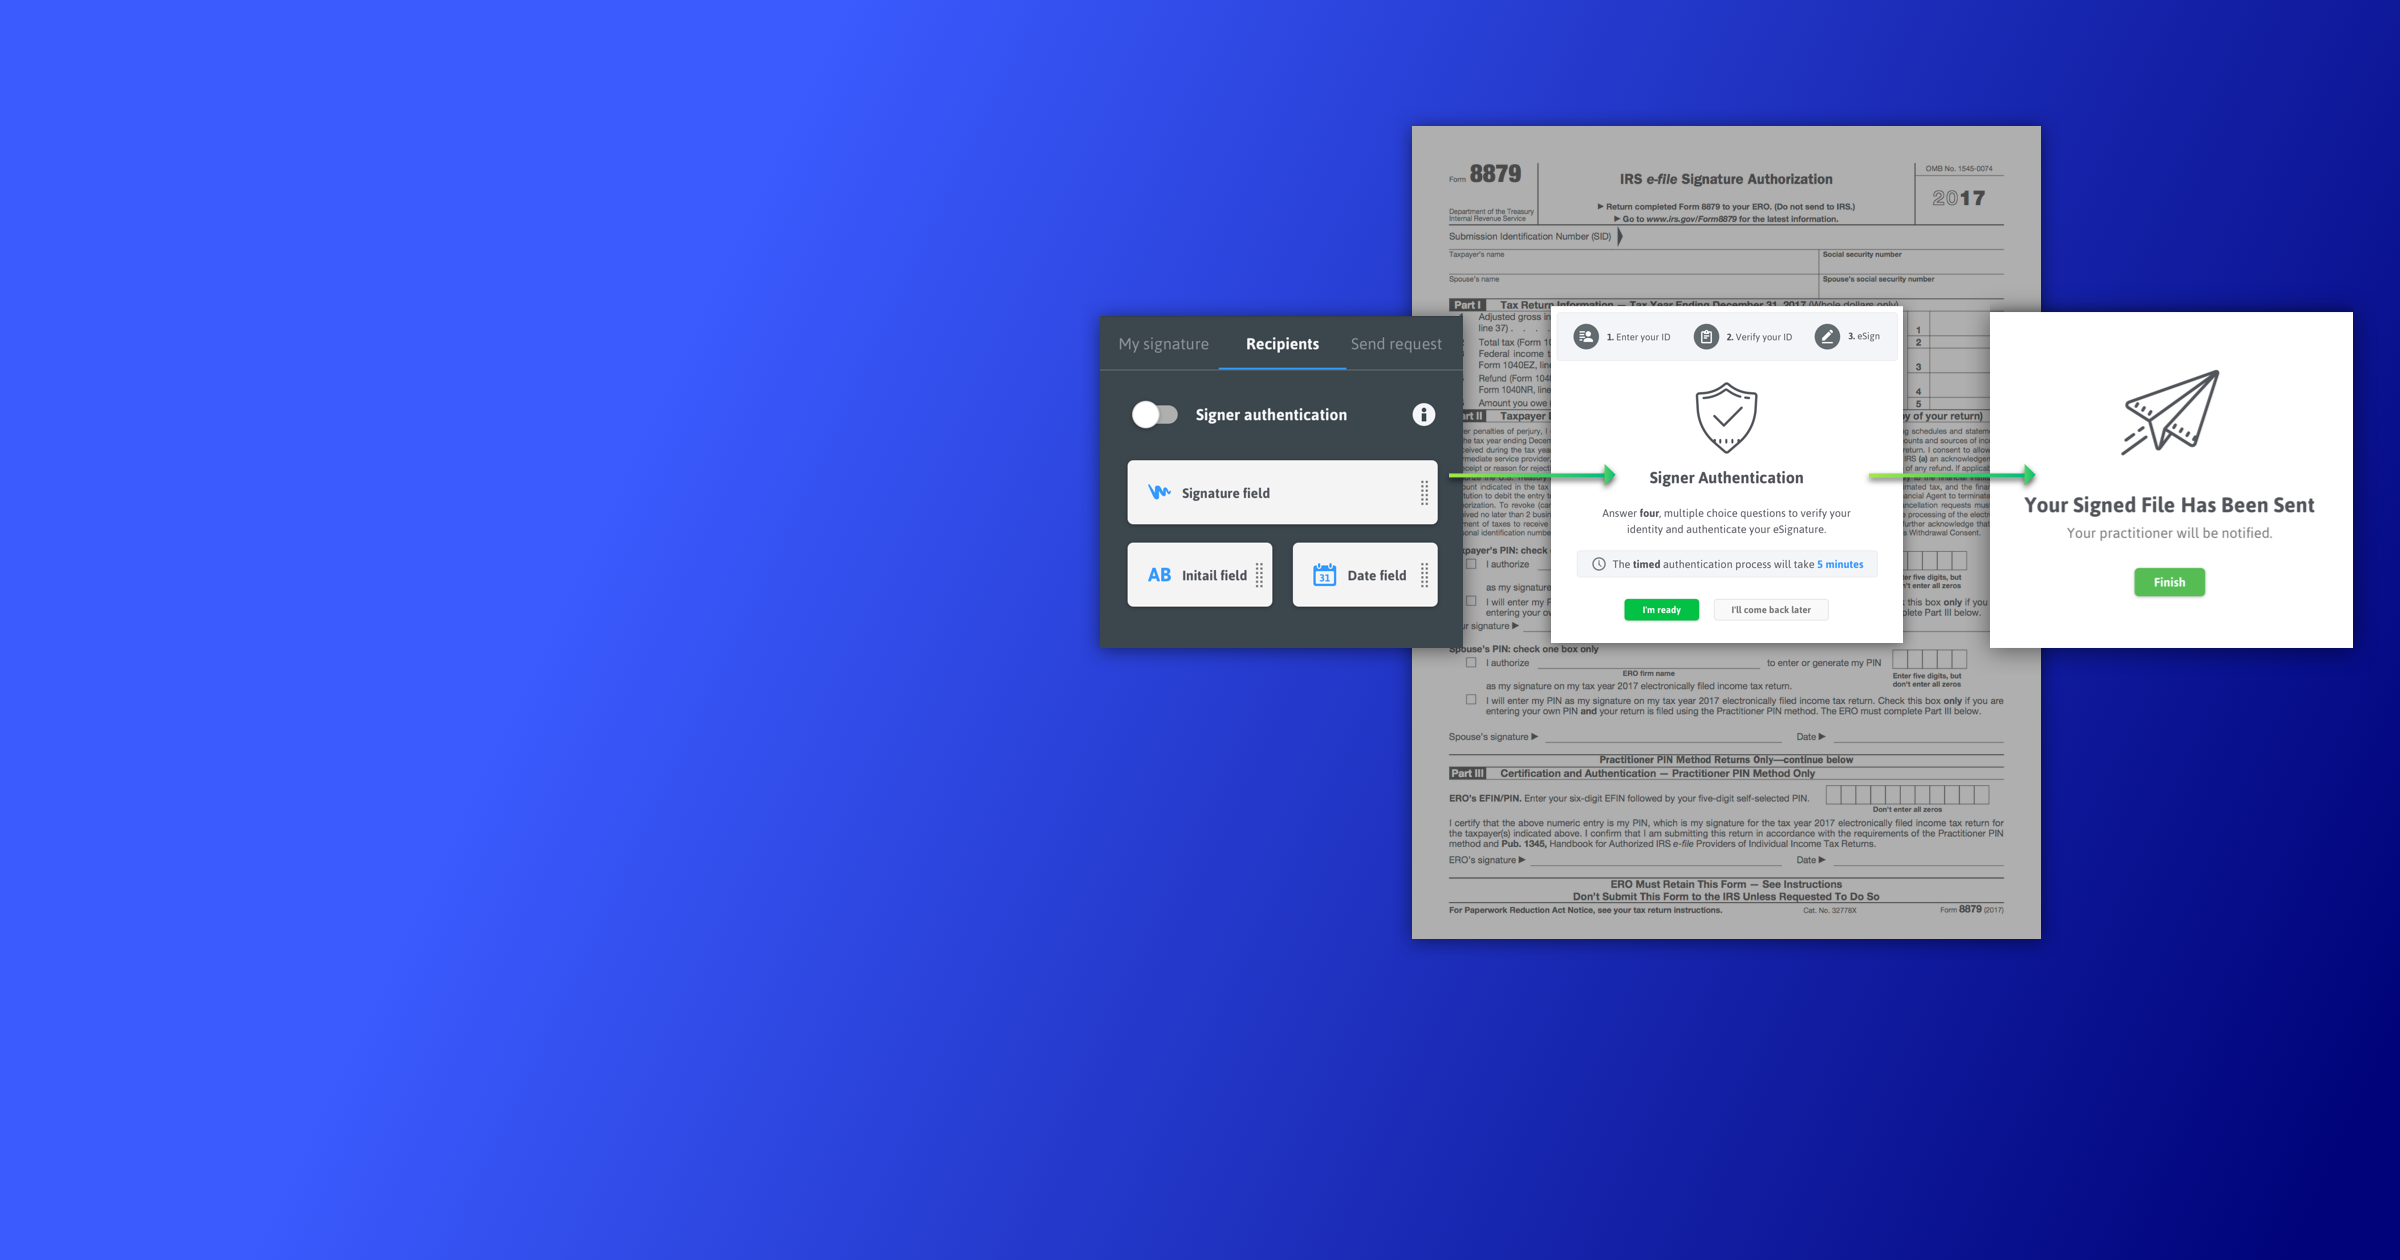 Feature Update: Knowledge-Based Authentication